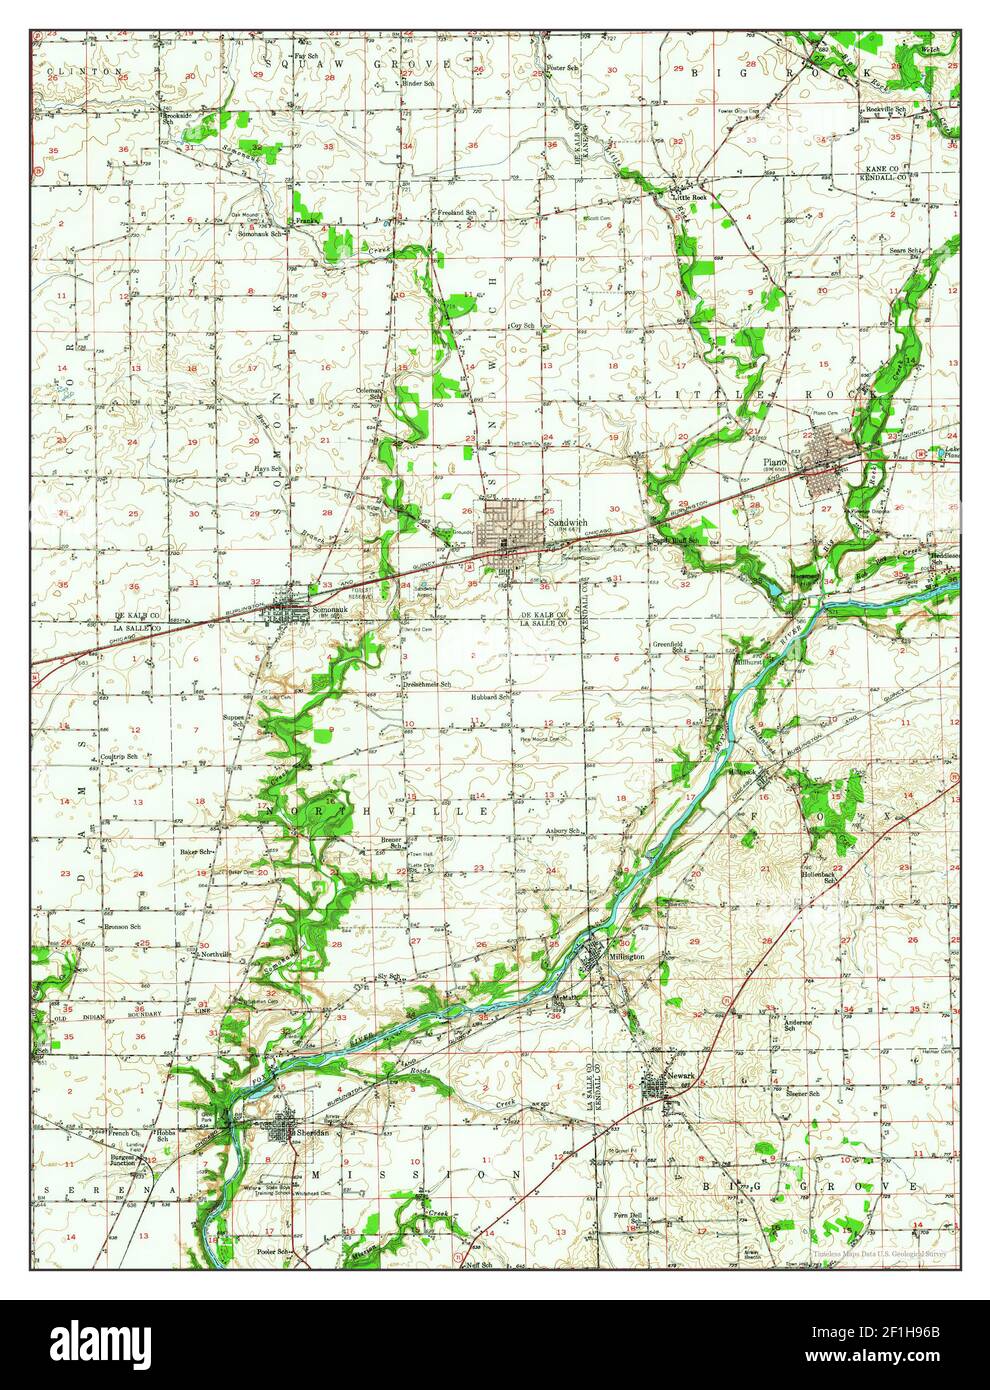 Sandwich Illinois Map 1948 162500 United States Of America By Timeless Maps Data Us Geological Survey 2F1H96B 